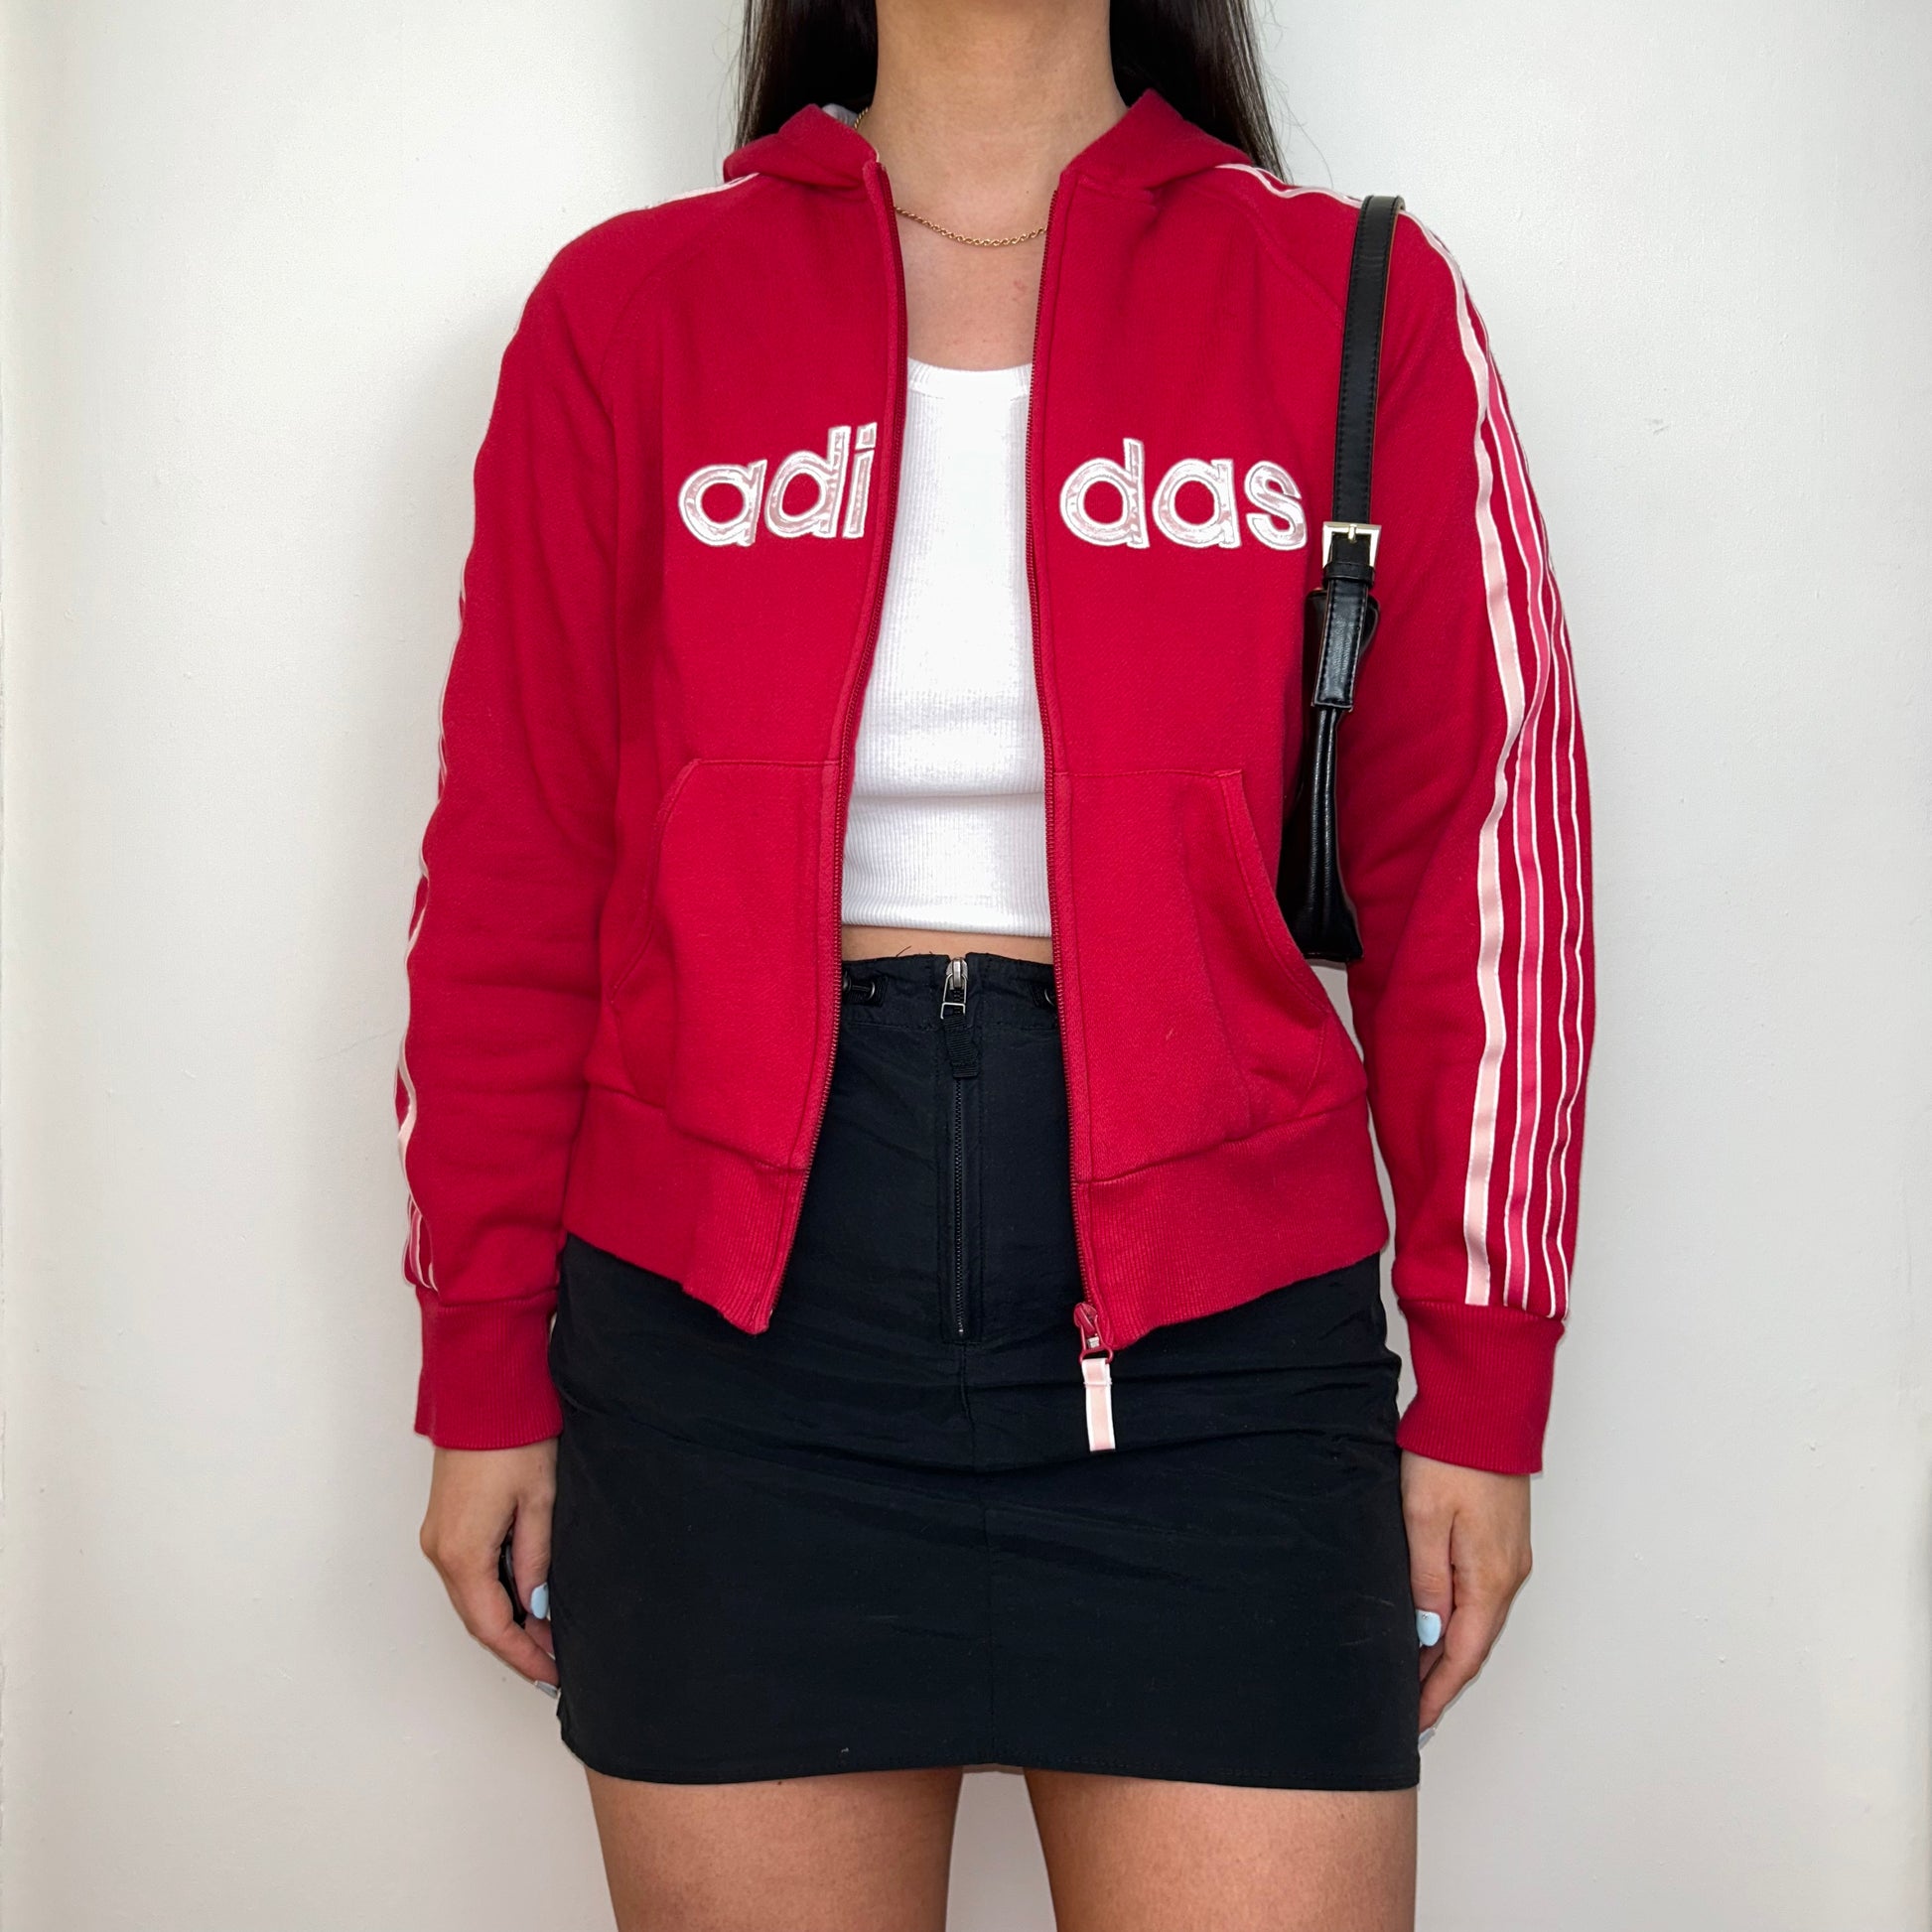 red zip up hoodie with big adidas text logo shown on a model wearing a black mini skirt with a black shoulder bag